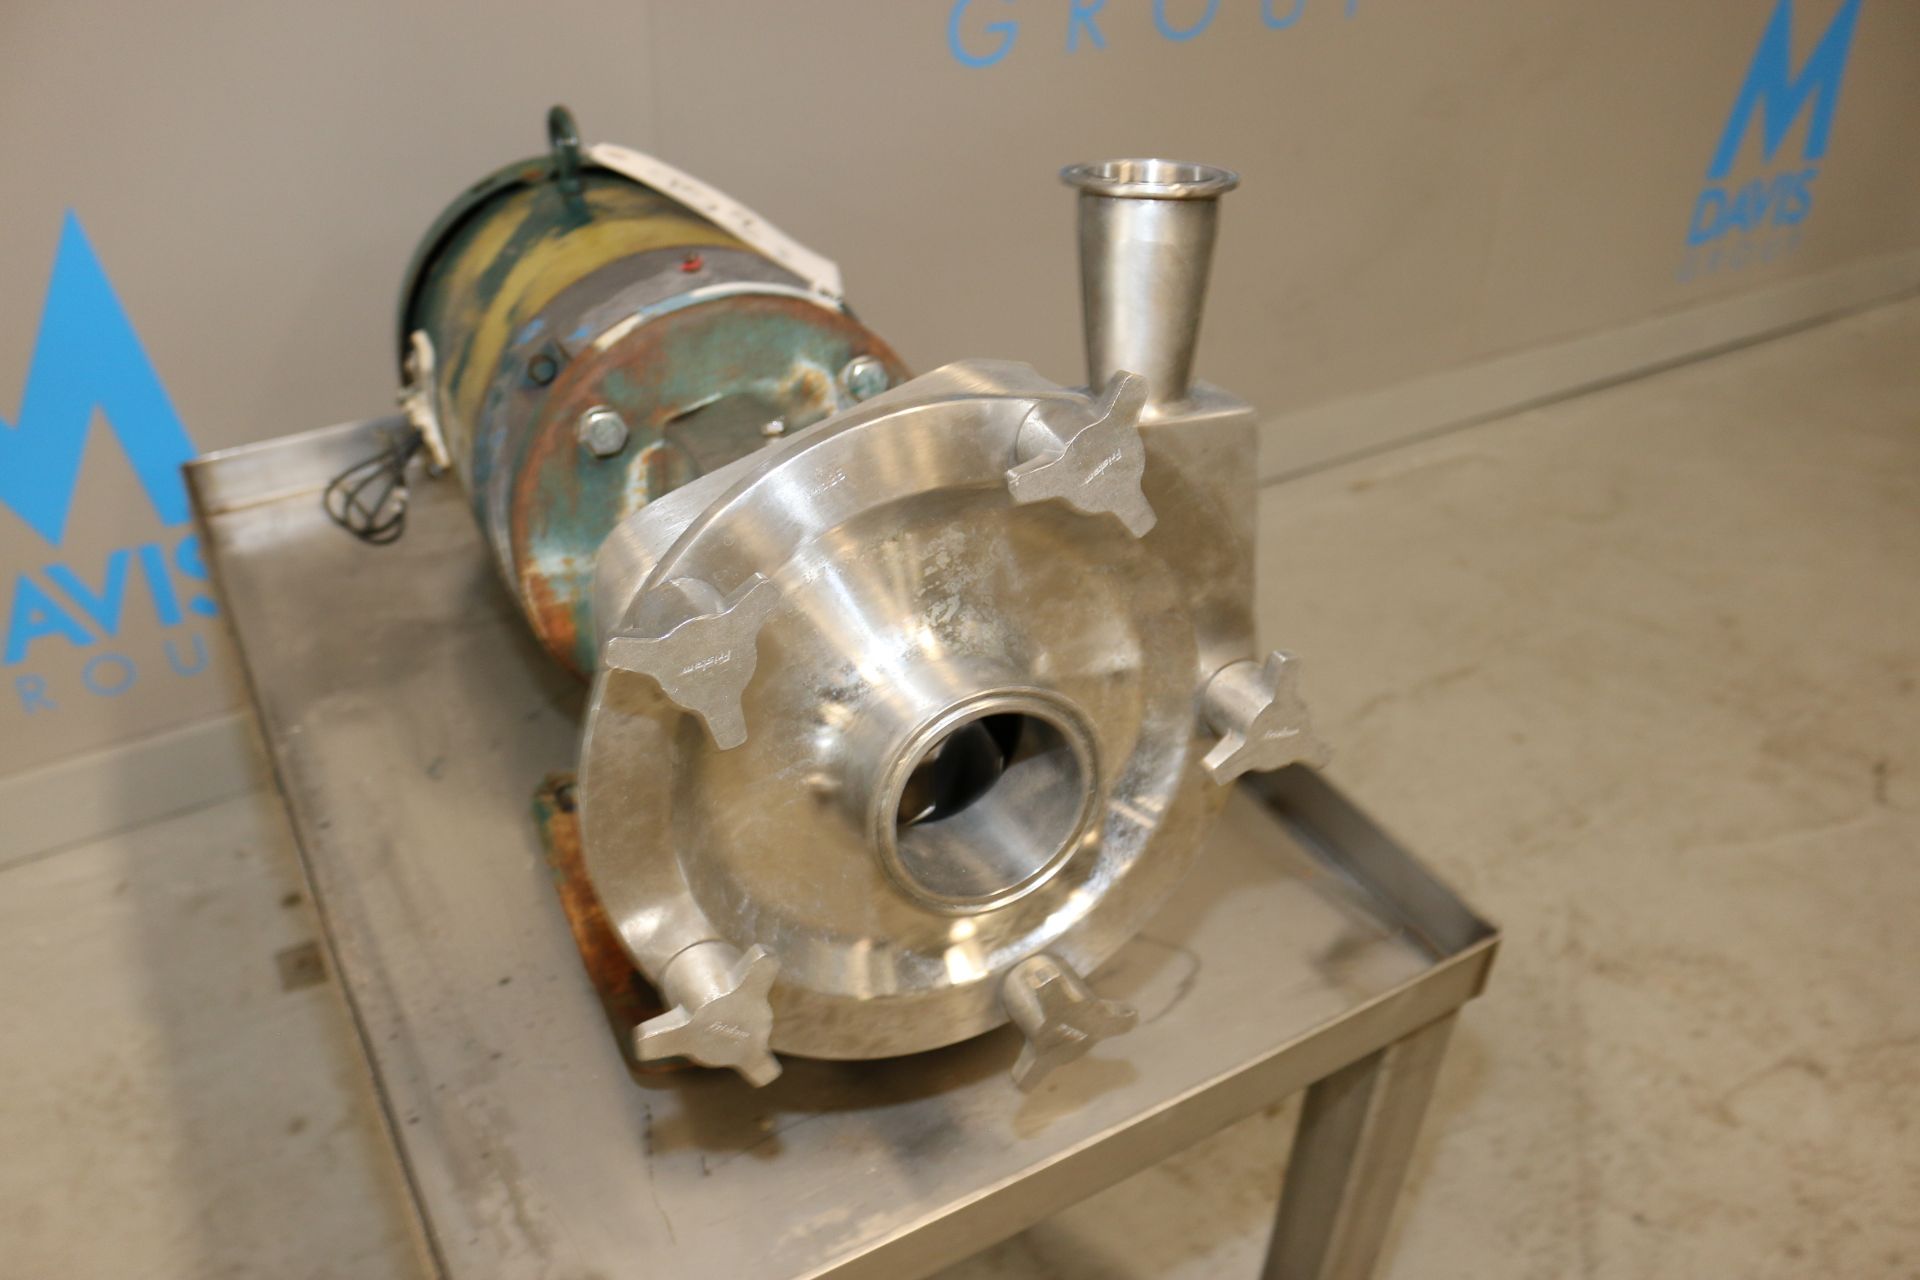 Fristam Aprox. 10 hp Centrifugal Pump, S/N FP17320203057, with Aprox. 2" x 3" Clamp Type Inlet/ - Image 4 of 6